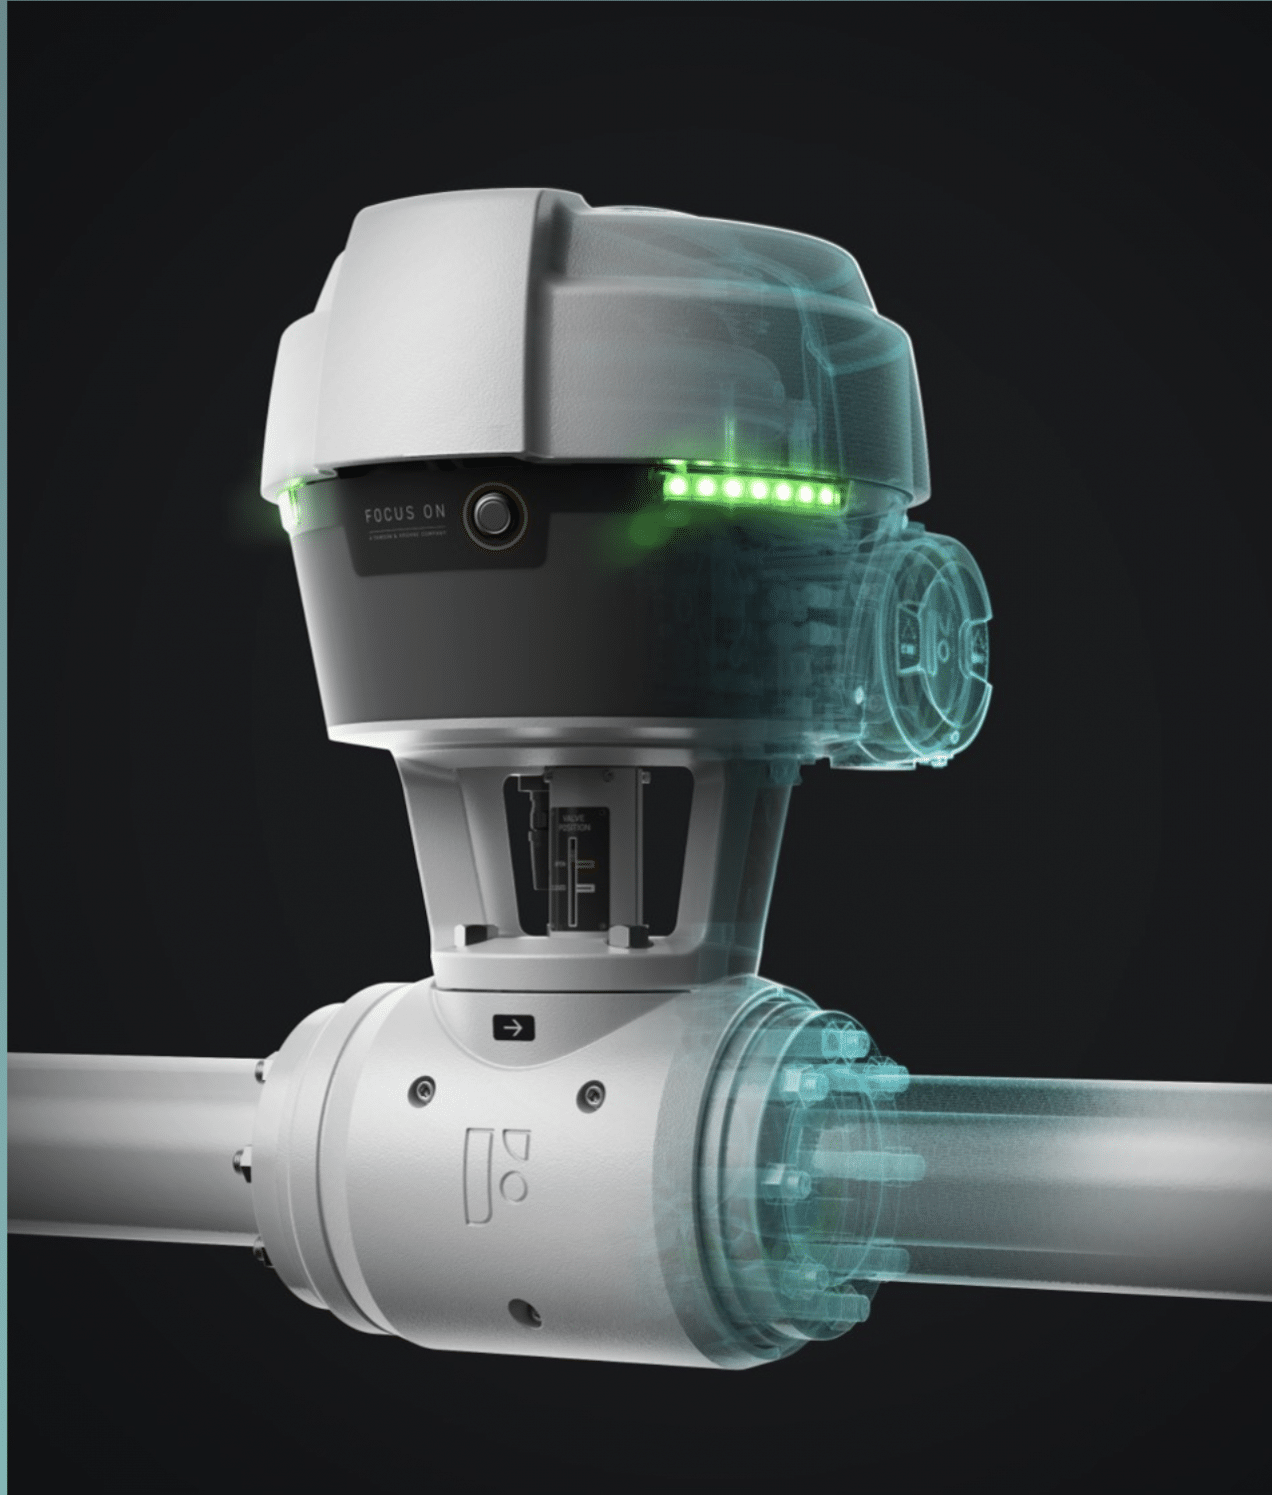 FOCUS-1 smart valve with APM Studio embedded in the device providing the diagnostic, prognostic and advanced control functions